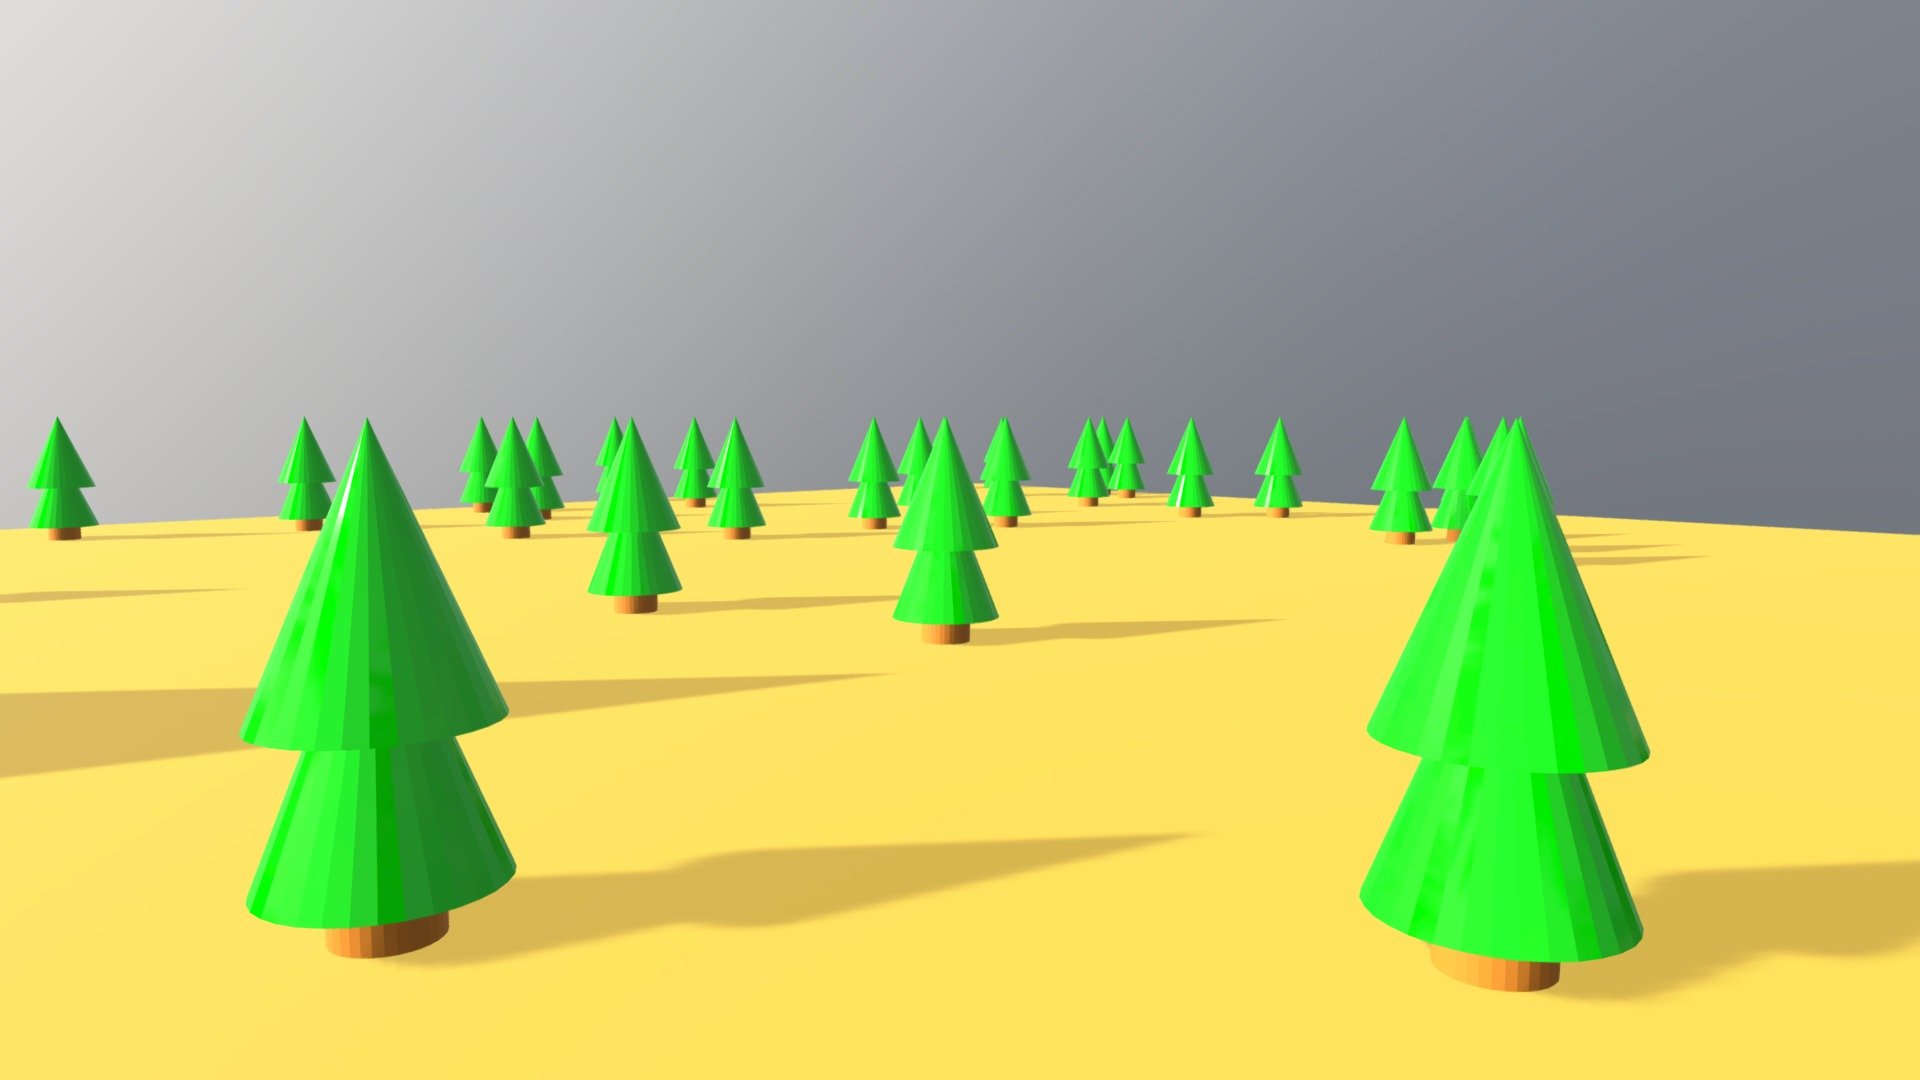 Created random trees in blender using particles. I hope you will like this. The video regarding this scene is available at youtube. Although it is not worthy, but you can modify and use it in your own ways 3d model